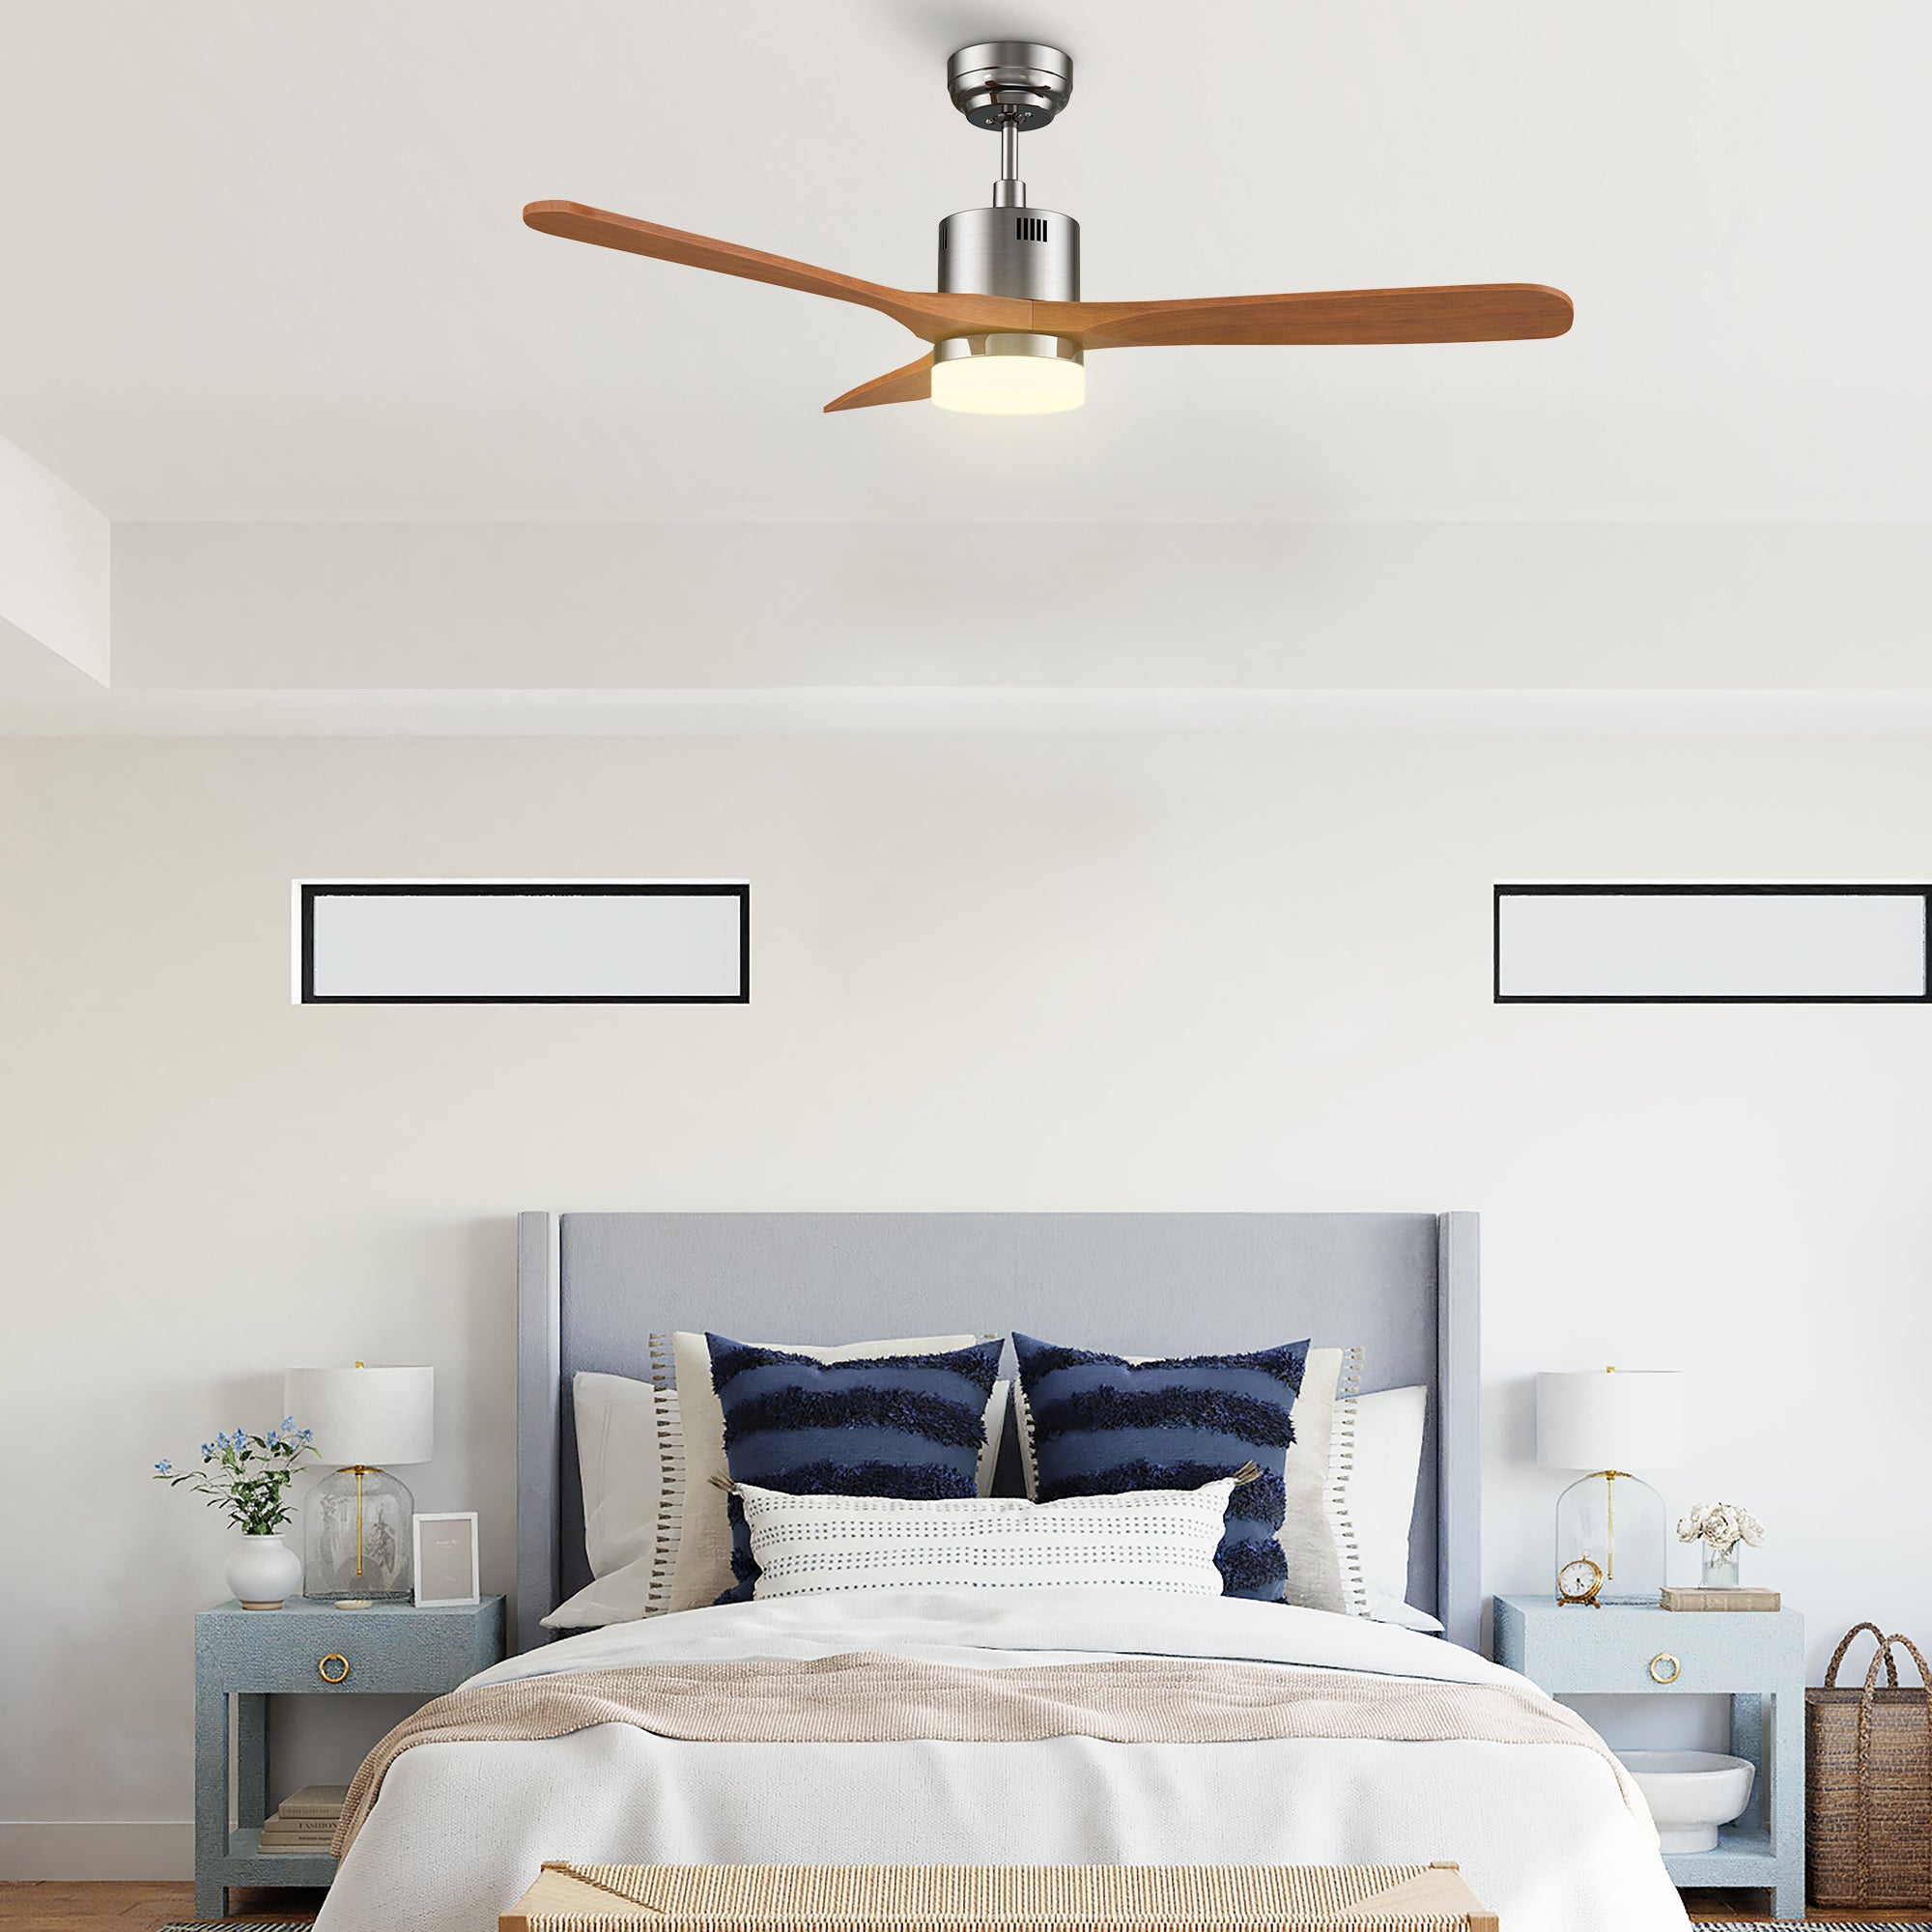 This Eton52&#39;&#39; smart ceiling fan keeps your space cool, bright, and stylish. It is a soft modern masterpiece perfect for your large indoor living spaces. This Wifi smart ceiling fan is a simplicity designing with Silver finish, use elegant Solid Wood blades and has an integrated 4000K LED daylight. The fan features Remote control, Wi-Fi apps, Siri Shortcut and Voice control technology (compatible with Amazon Alexa and Google Home Assistant ) to set fan preferences.